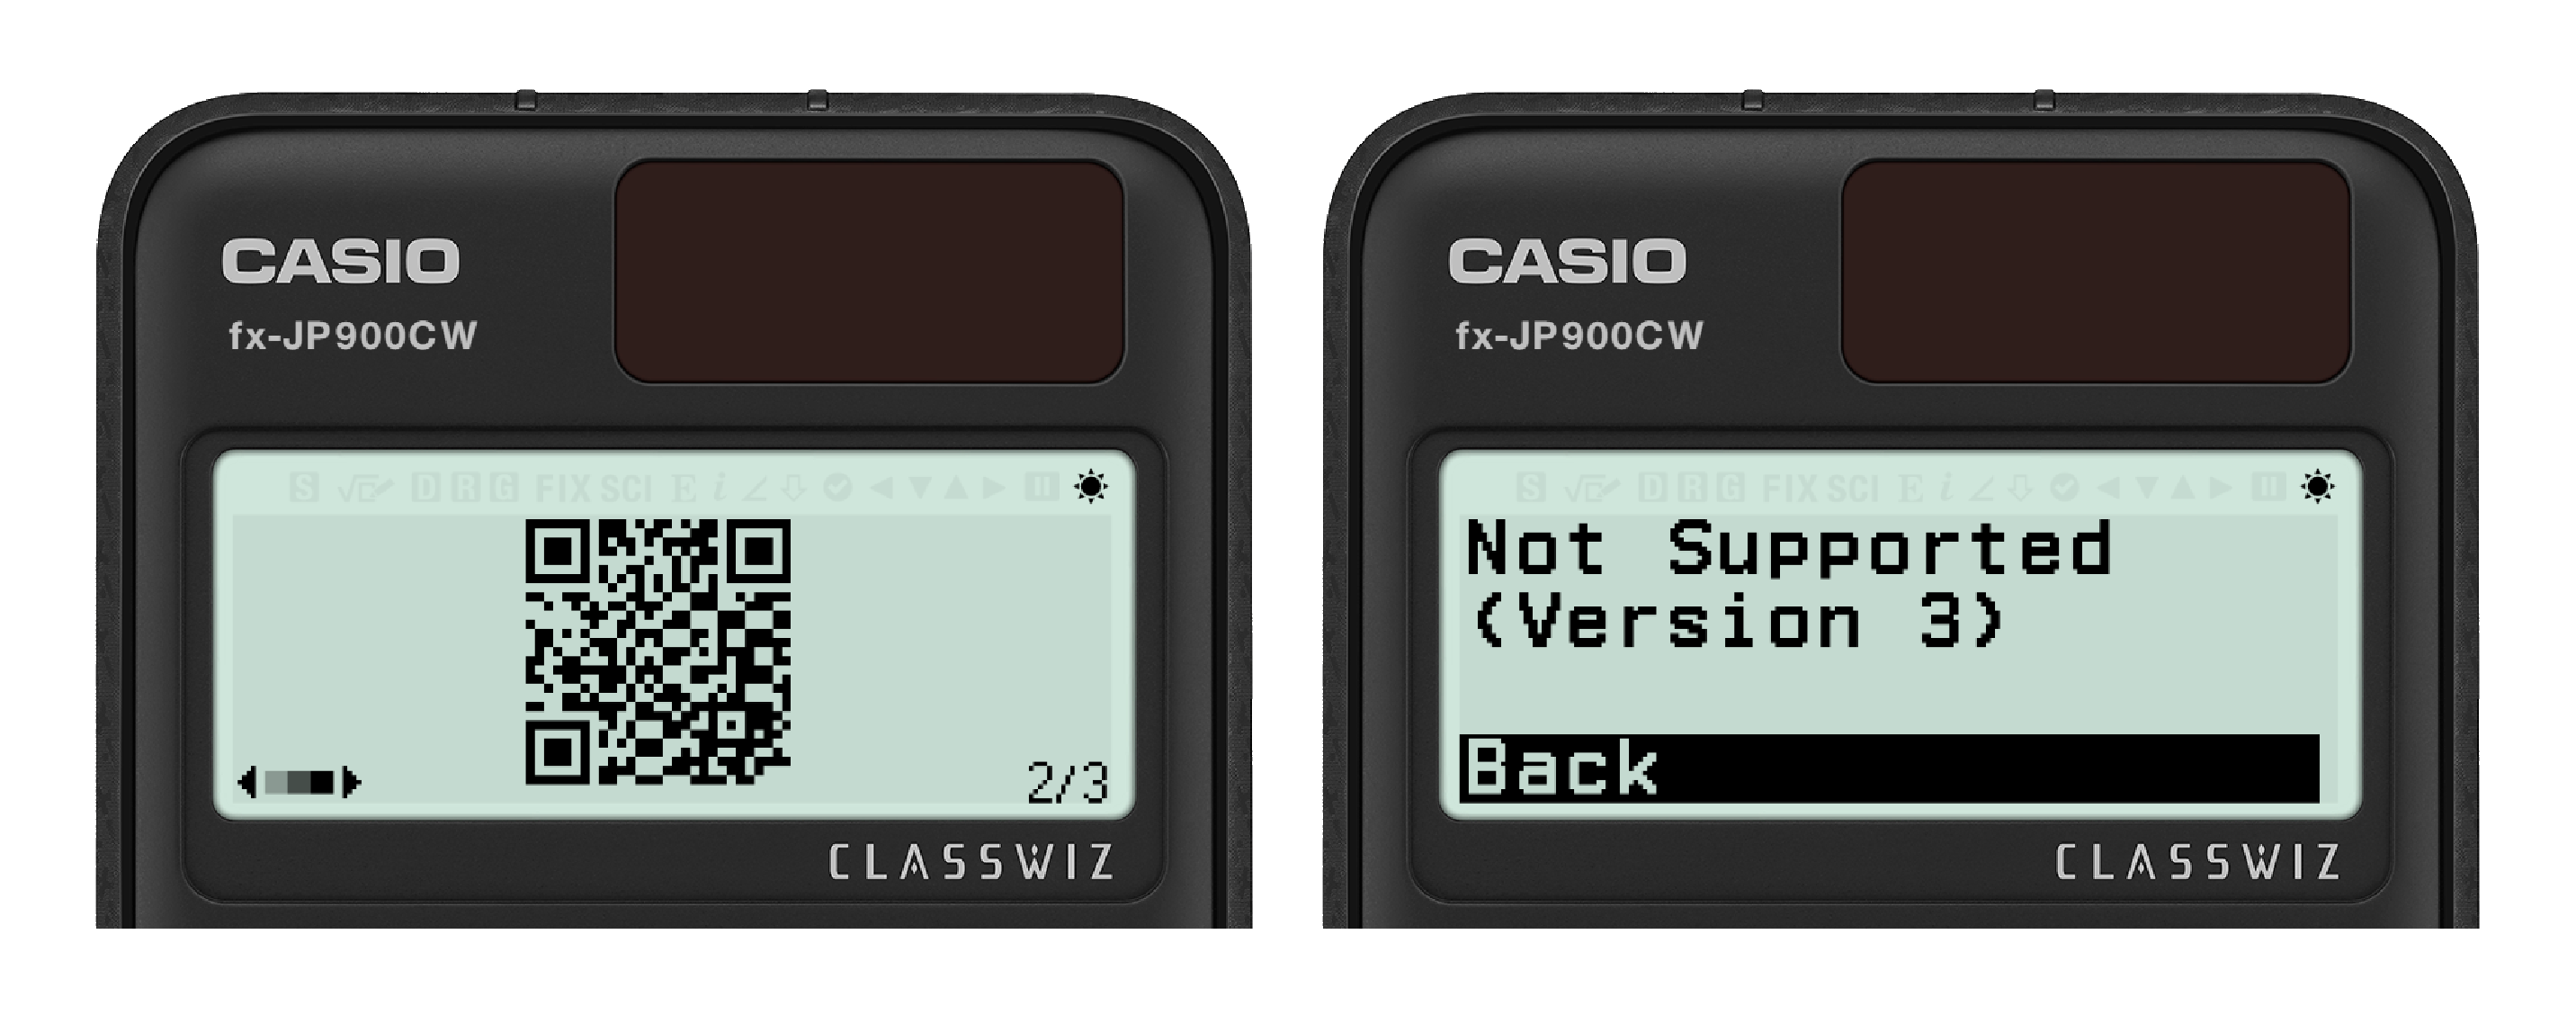 2 pictures of a Casio fx-JP900CW, one is showing a version 3 QR code, the other is displaying the error "Not Supported (Version 3)".